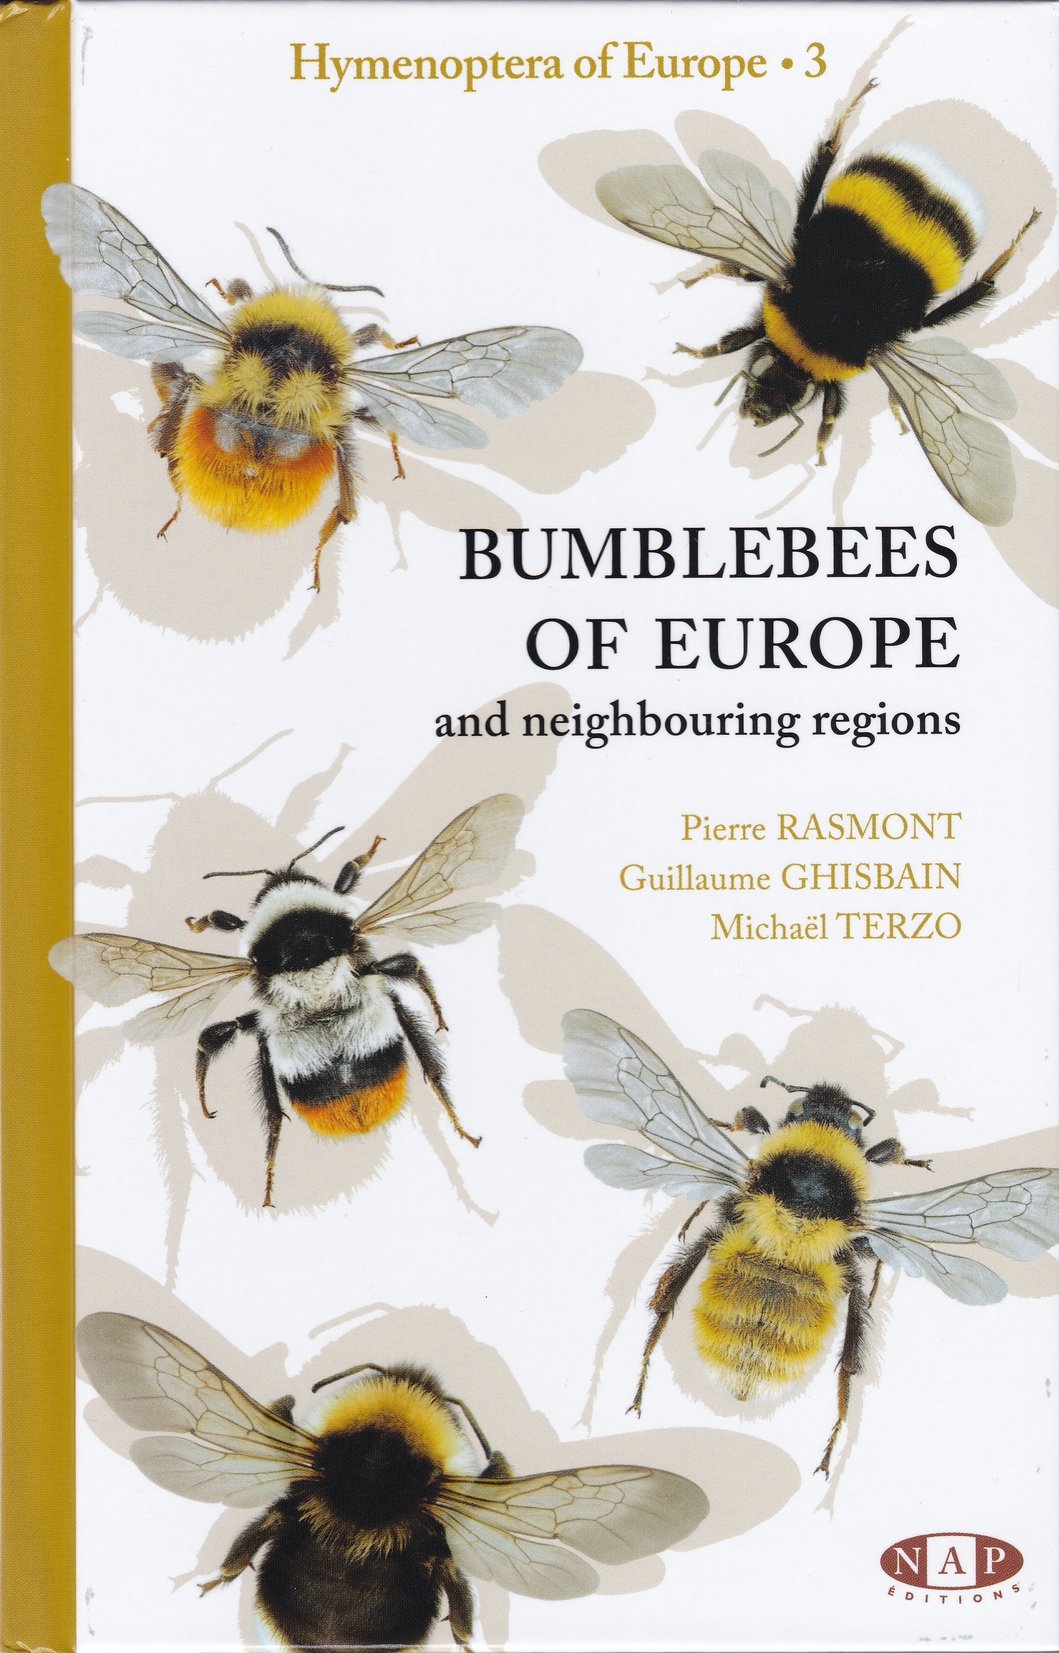 Hymenoptera of Europe 3. - Bumblebees of Europe and neighbouring regions (Rippl-Rónai Múzeum CC BY-NC-ND)